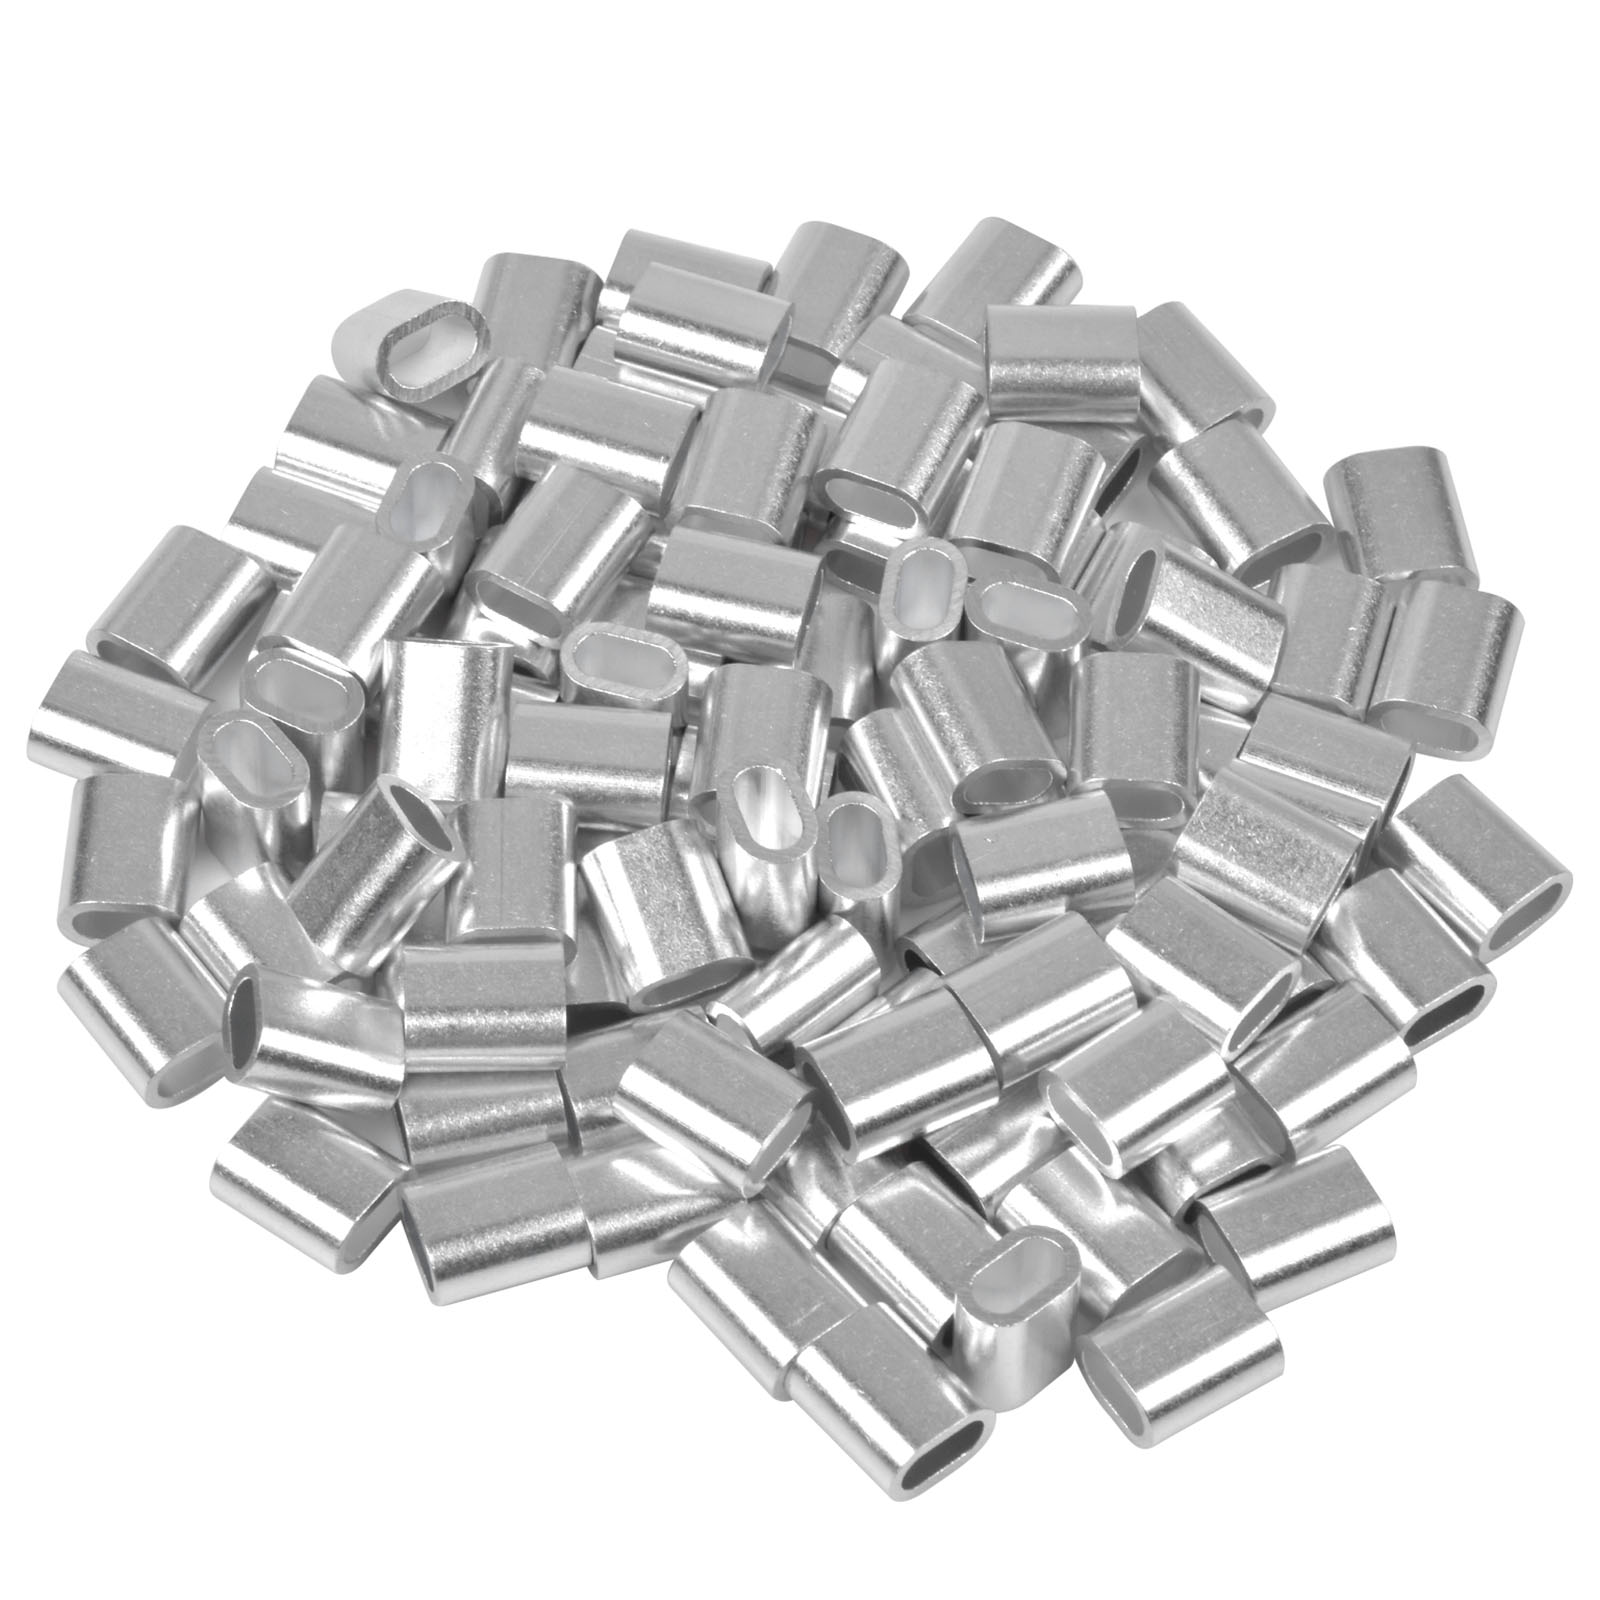 Save on 100pcs Aluminum Sleeve Oval Ferrule with Wire Rope Clamps